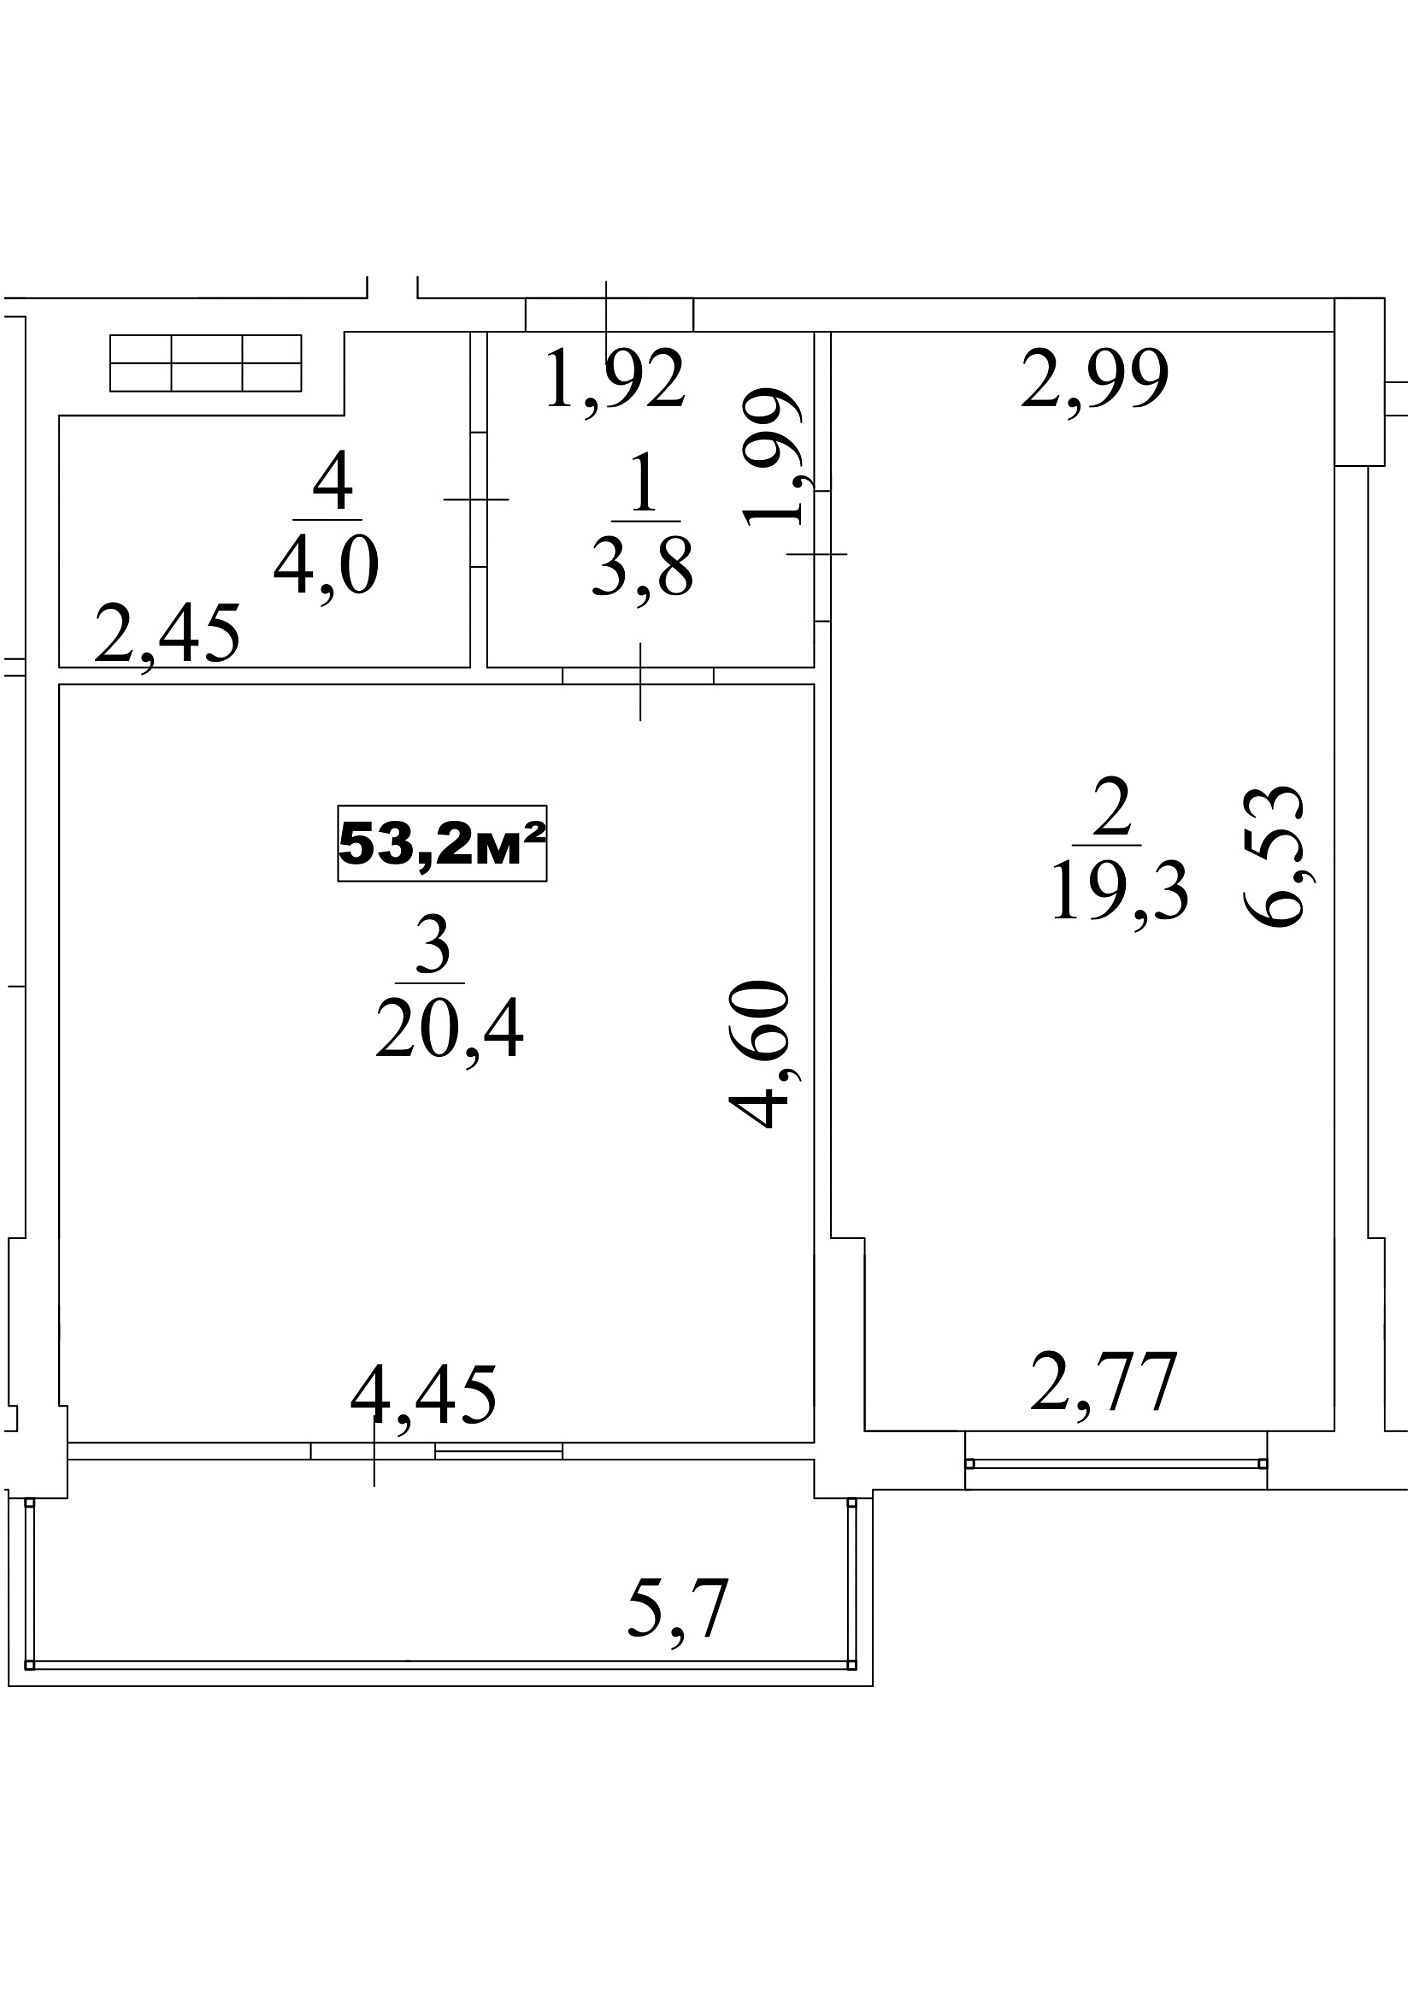 Planning 1-rm flats area 53.2m2, AB-10-01/00008.